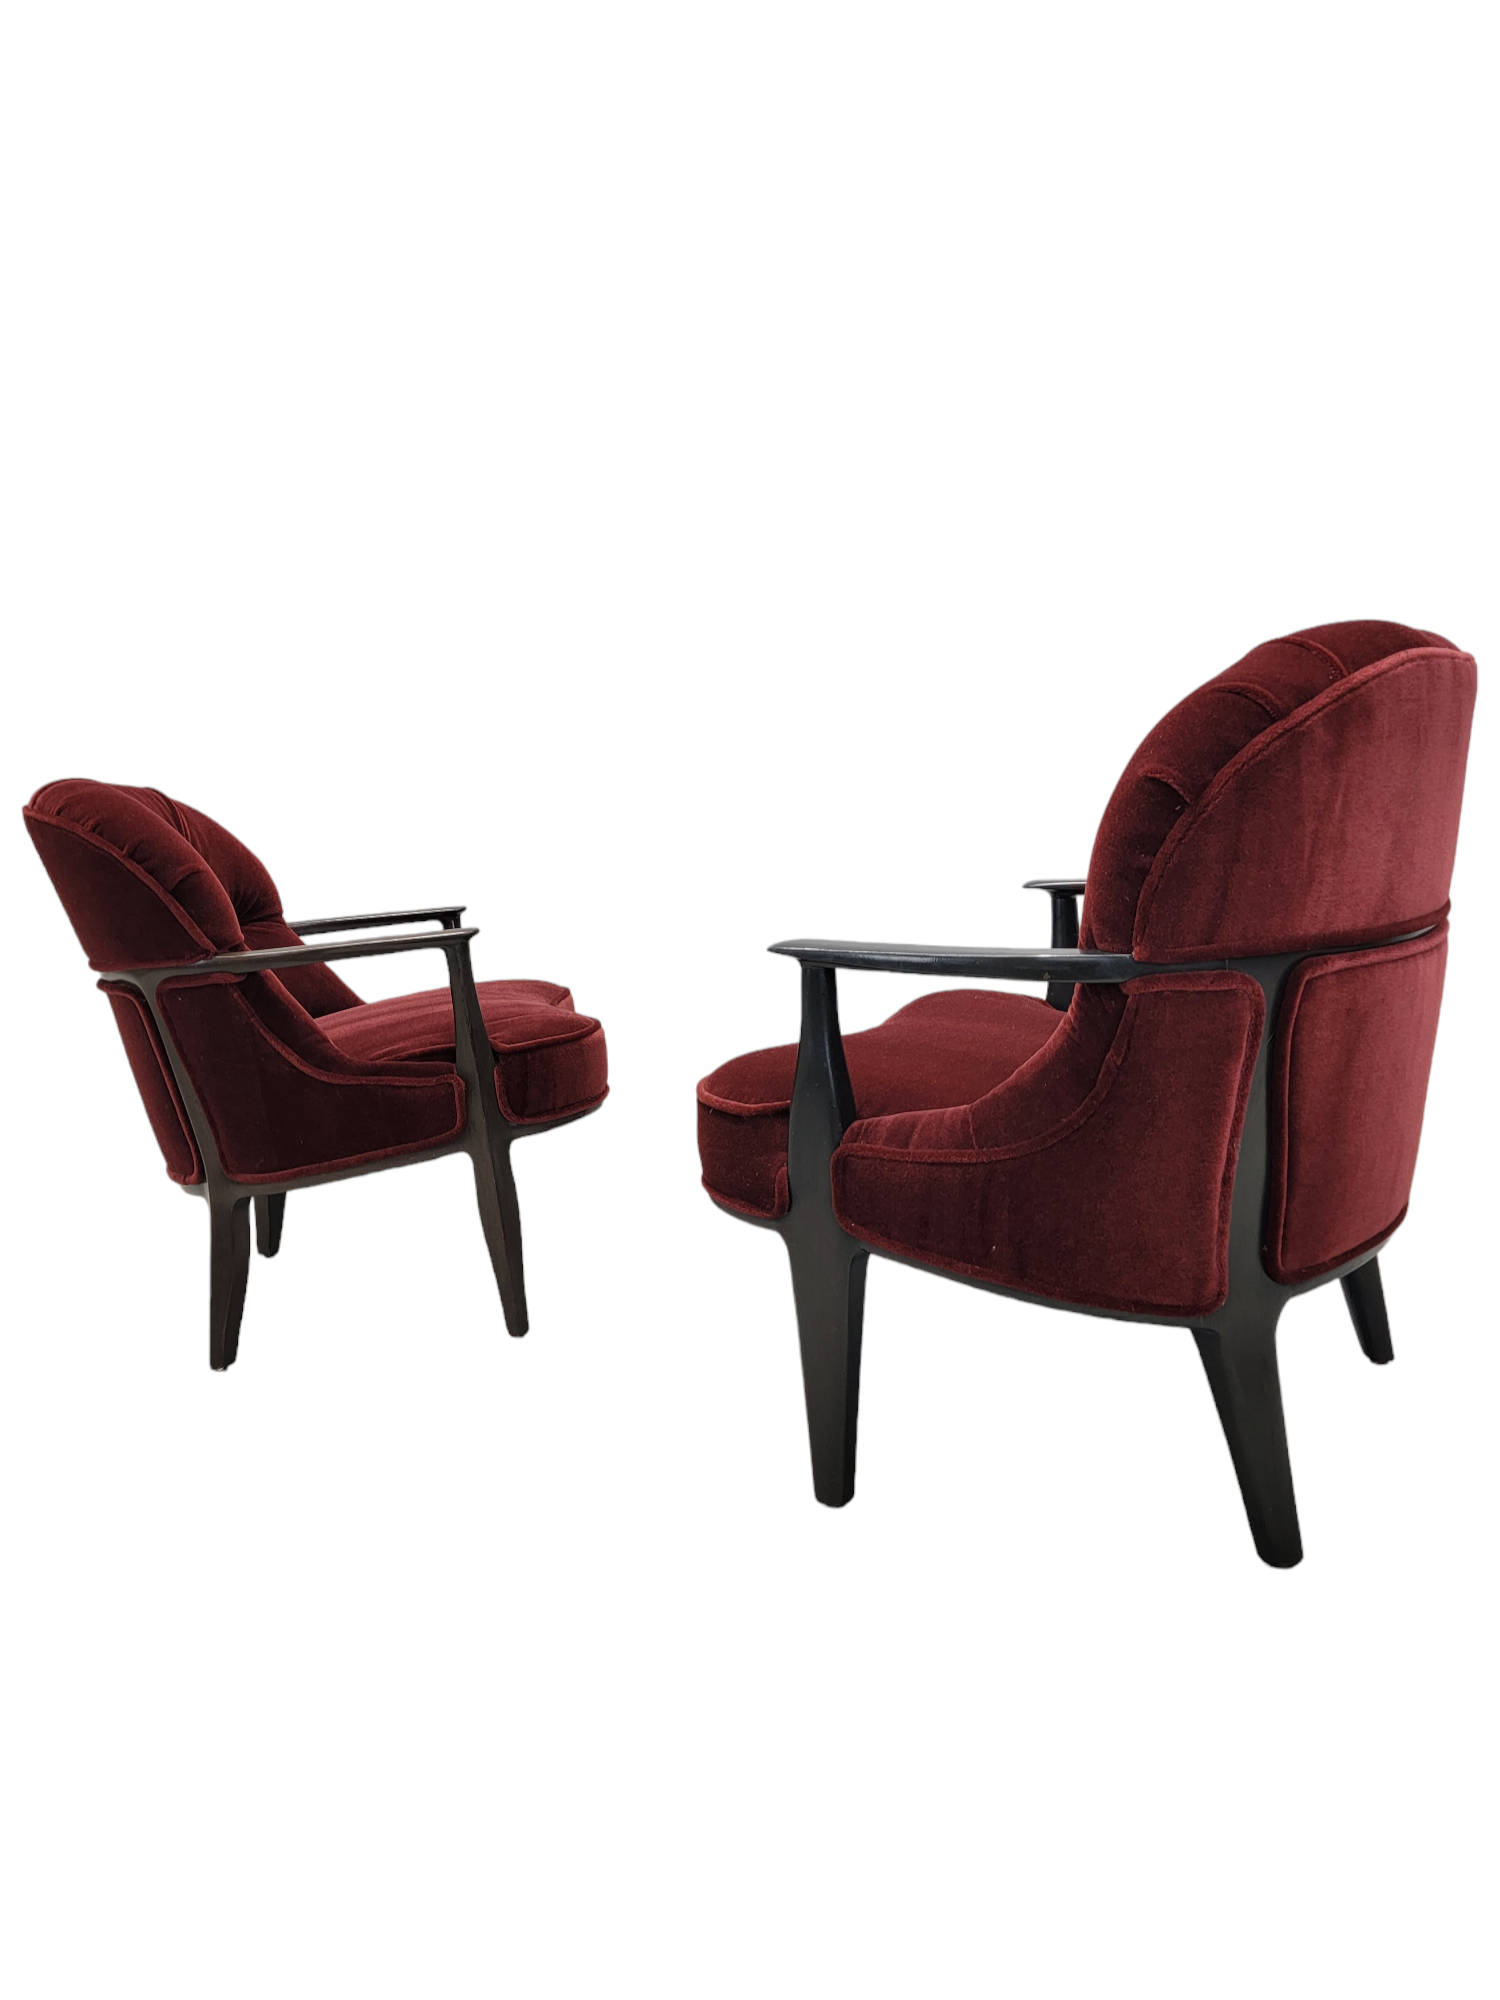 Mid Century Modern Edward Wormley Janus Style Tufted Lounge Chairs Newly Upholstered in Maroon Mohair - Pair